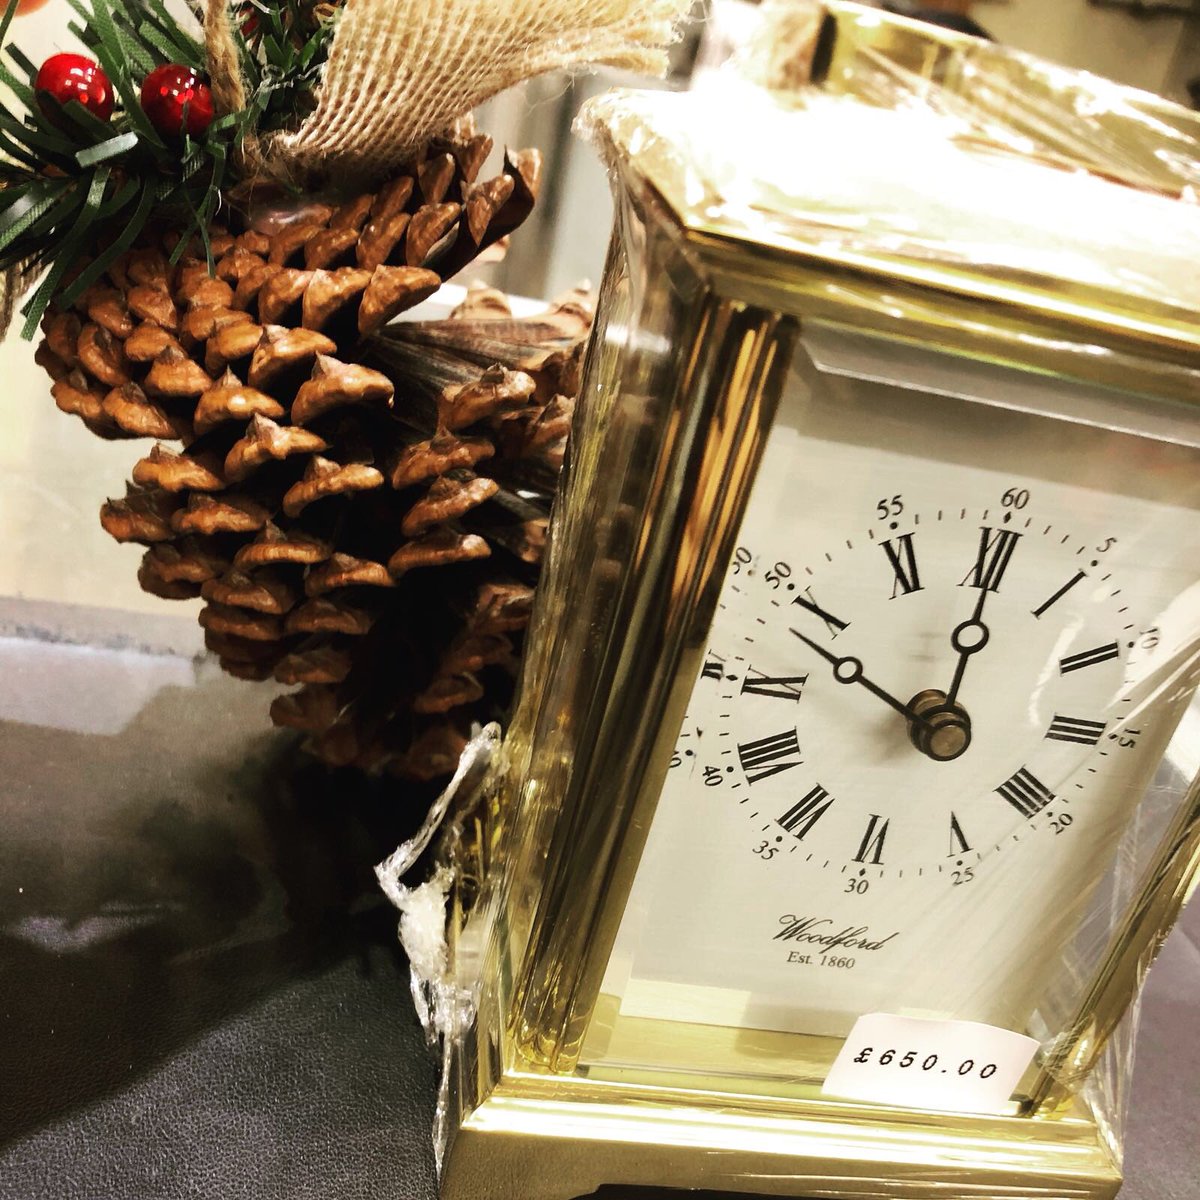 Why not treat someone to a carriage clock this Christmas! #Christmas #Xmas #Jewellery #watches #London #Gifts #GiftIdeas  #carriageclock